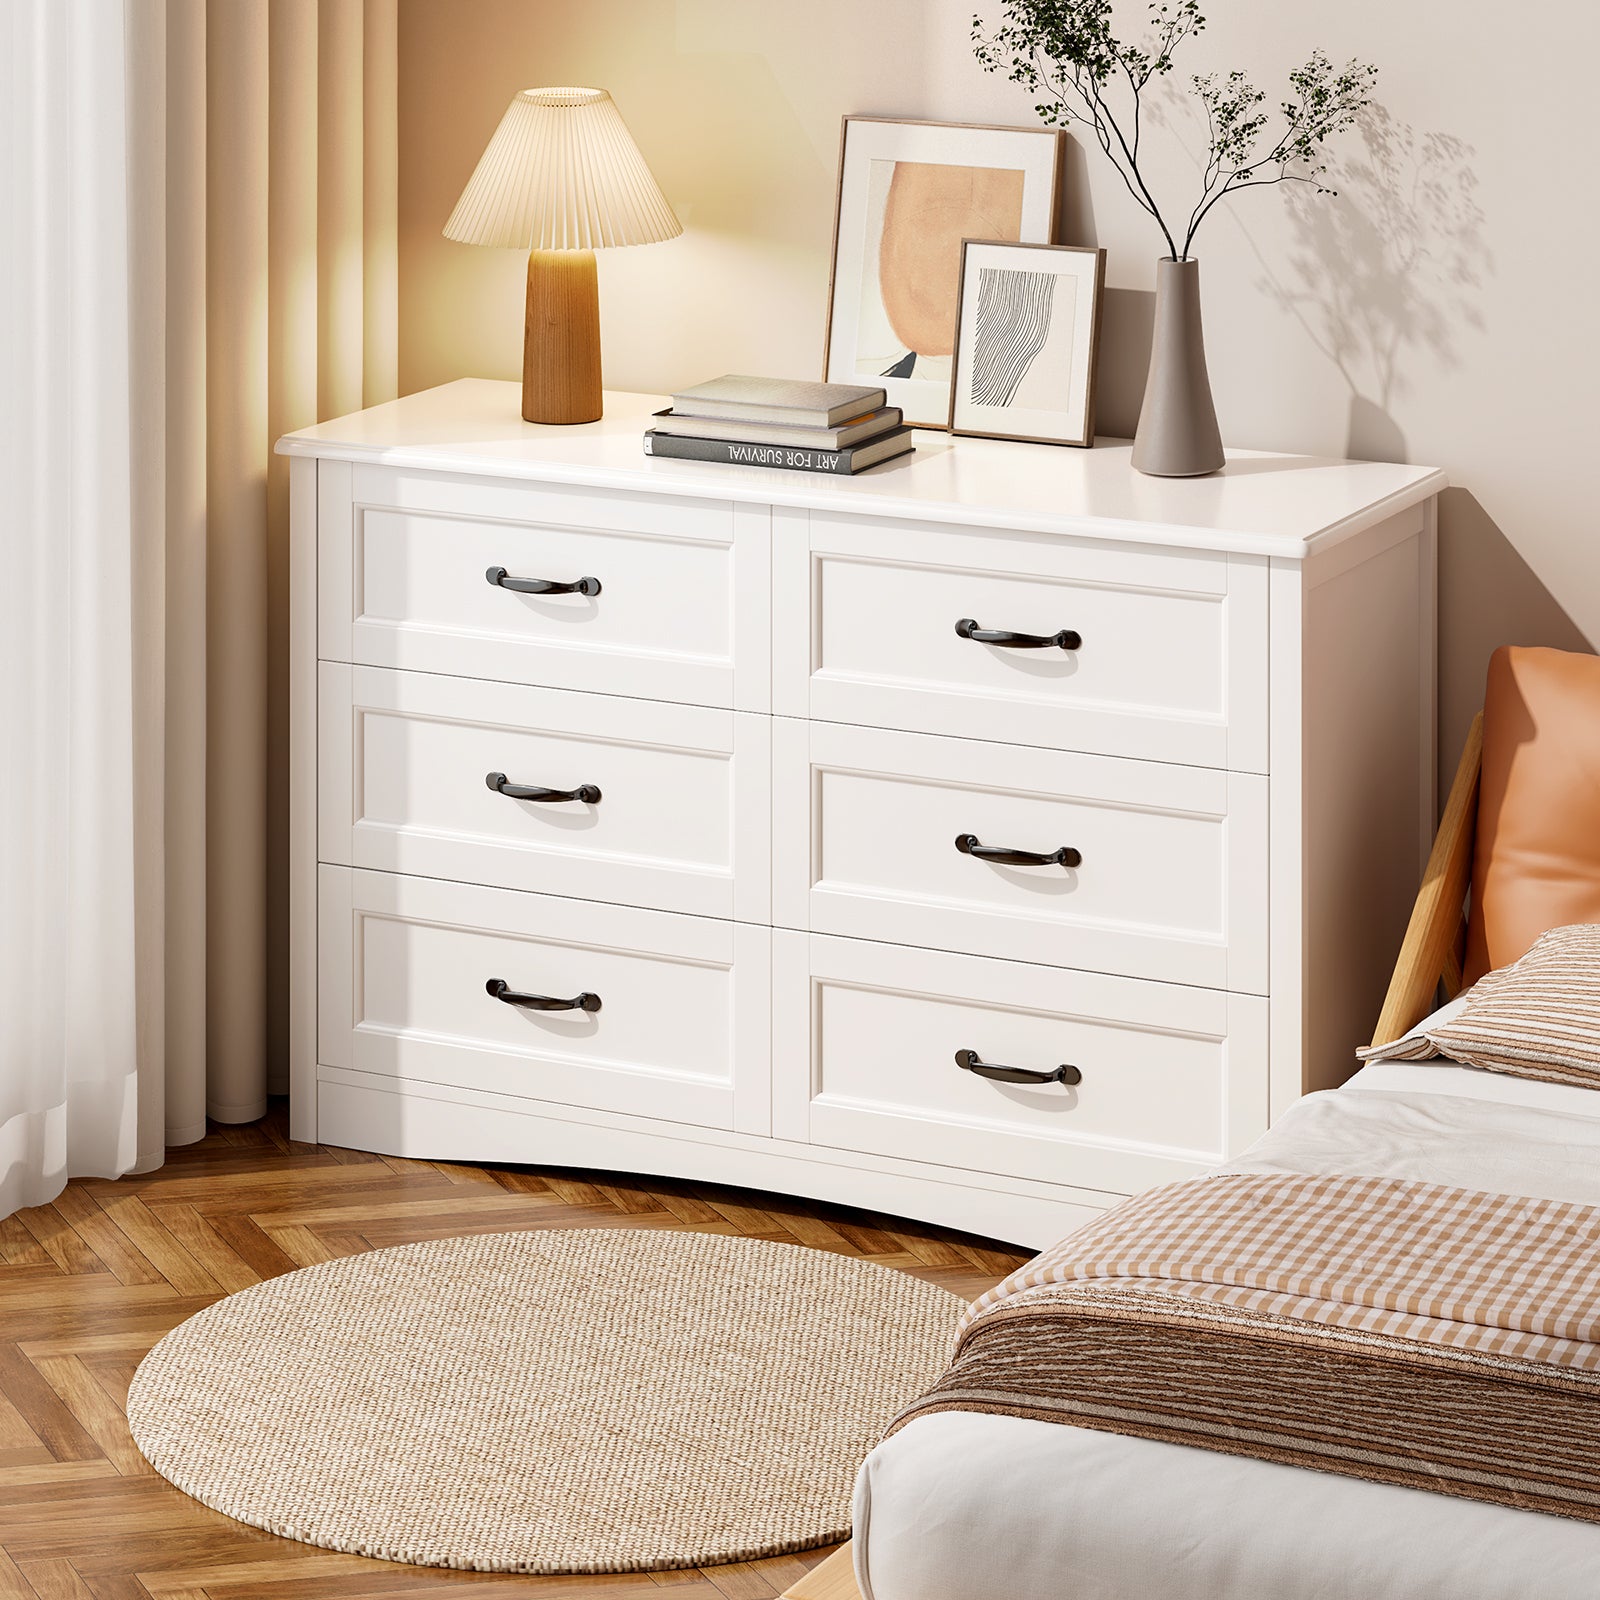 Gizoon AP40 6 Drawer Modern Wood Dresser with Mental Handle